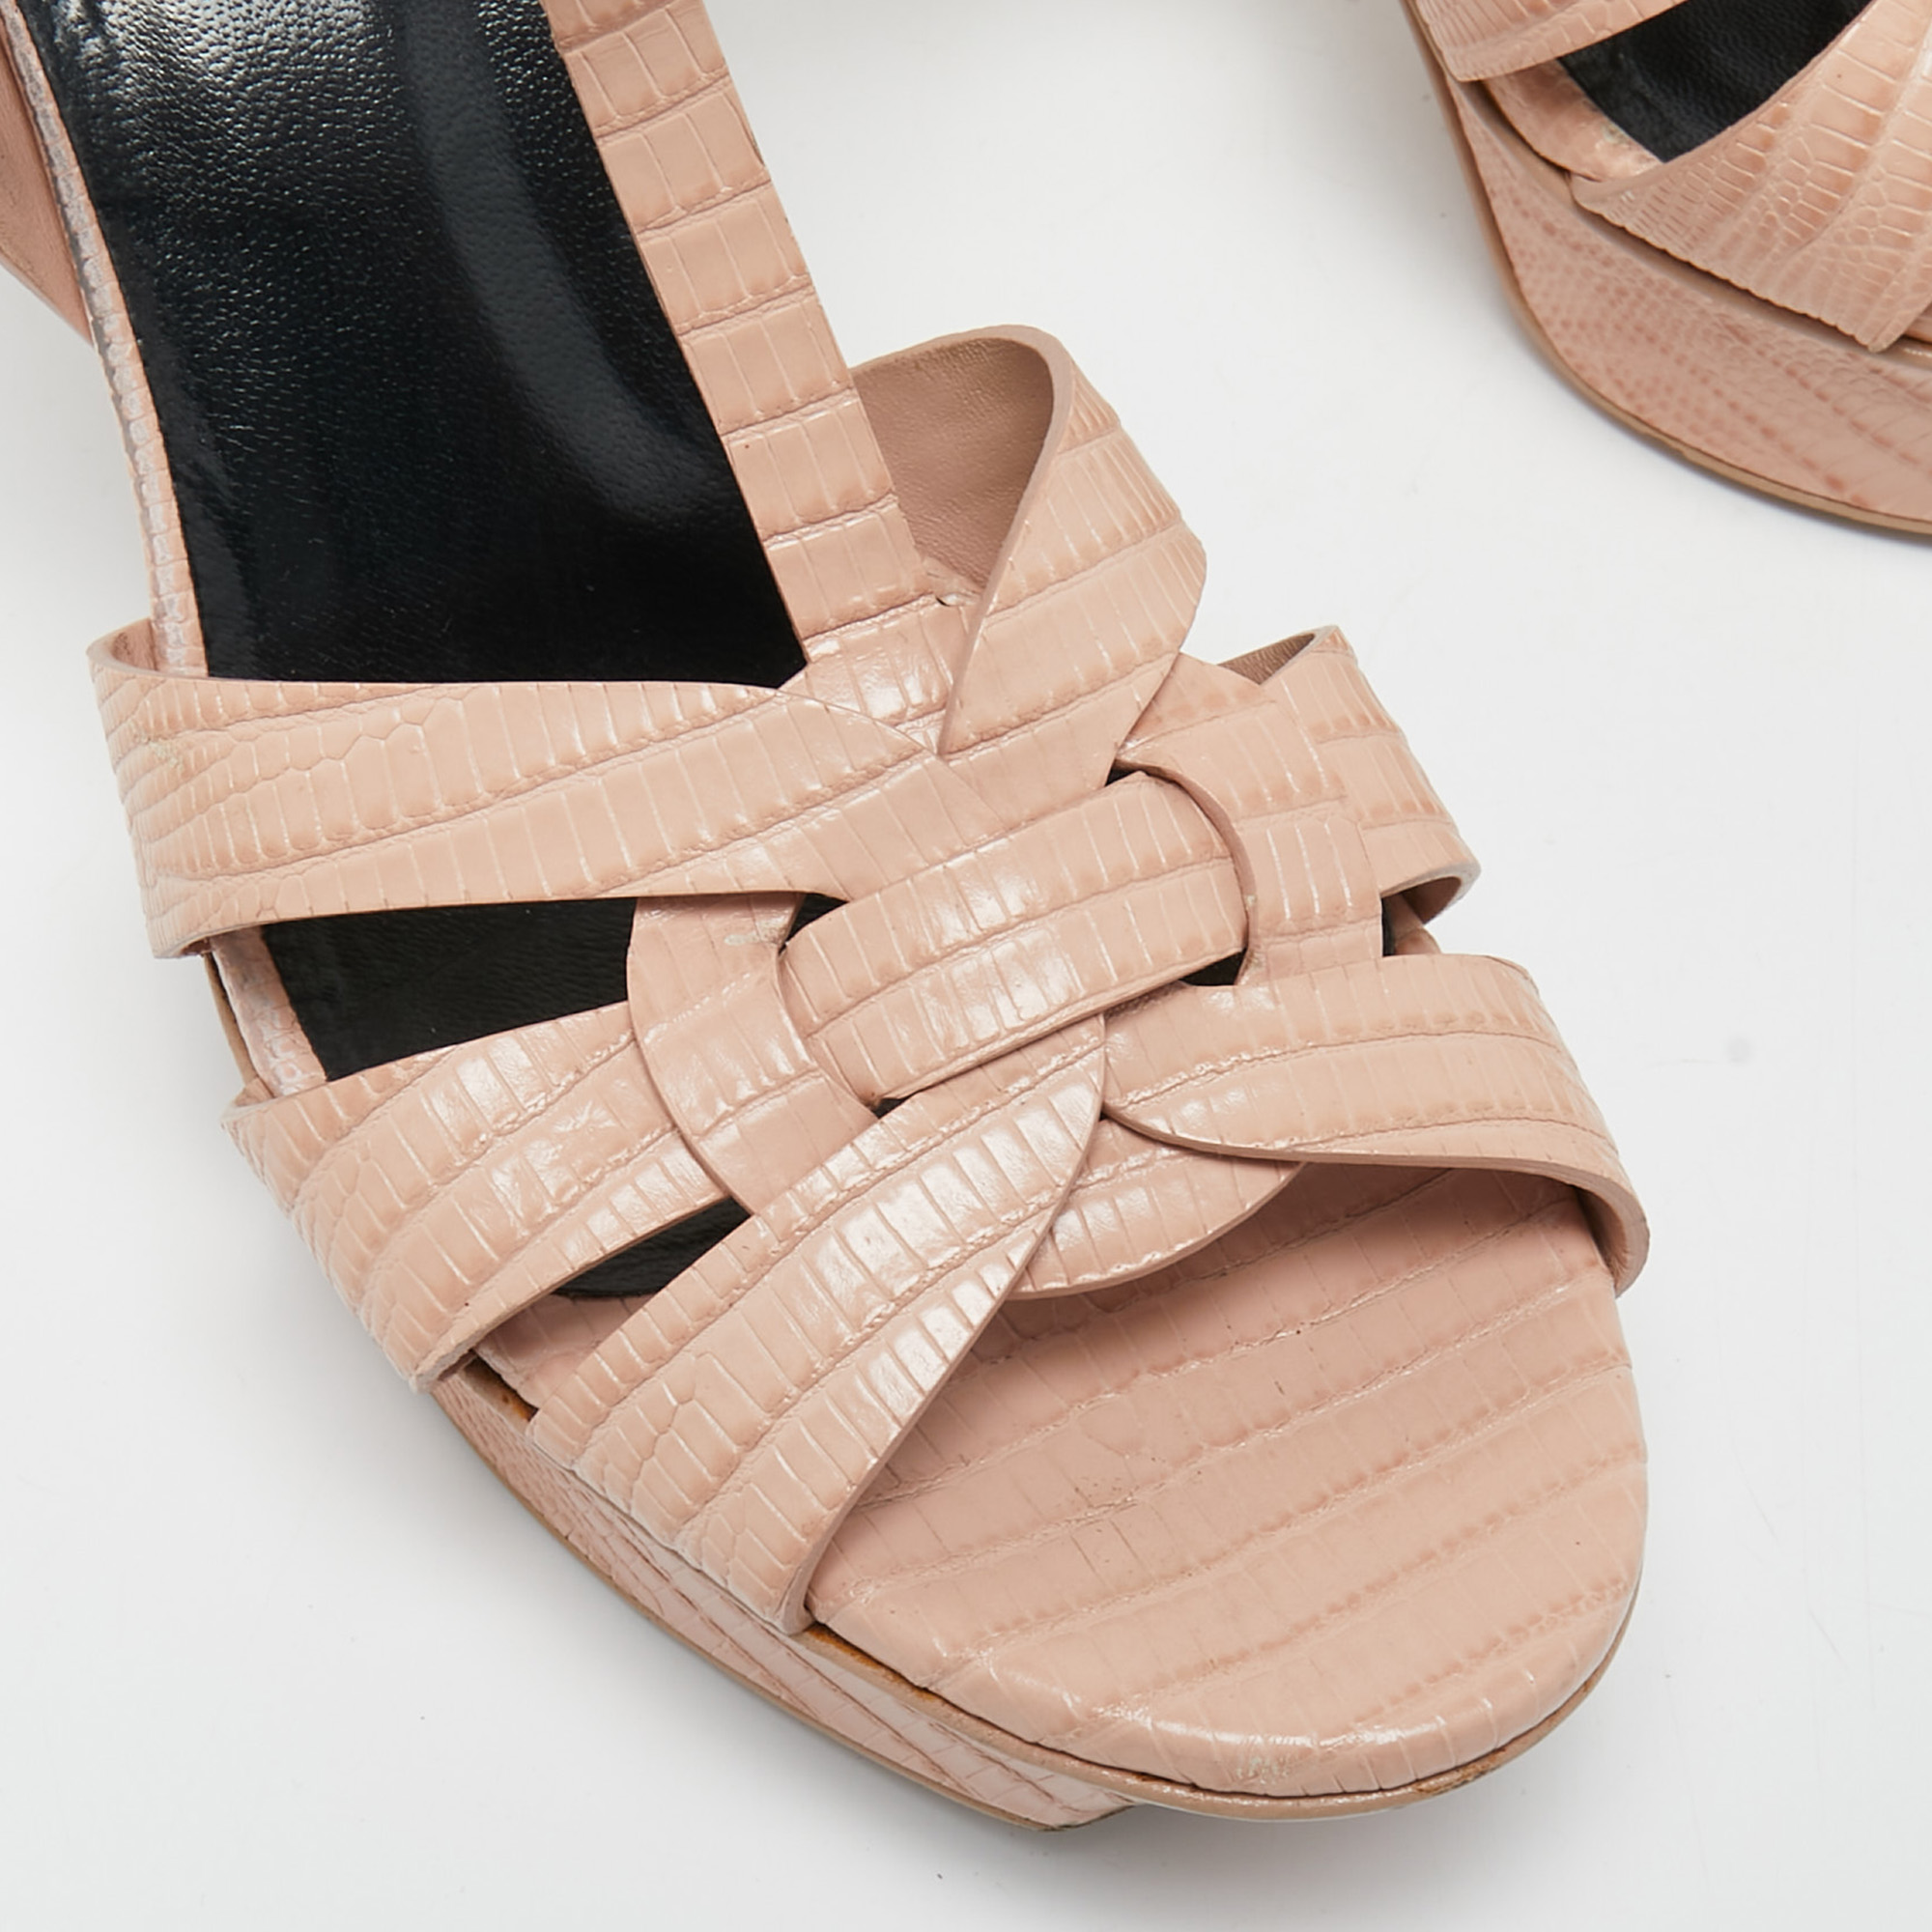 Yves Saint Laurent Pink Lizard Embossed Leather Tribute Ankle Strap Sandals Size 38.5